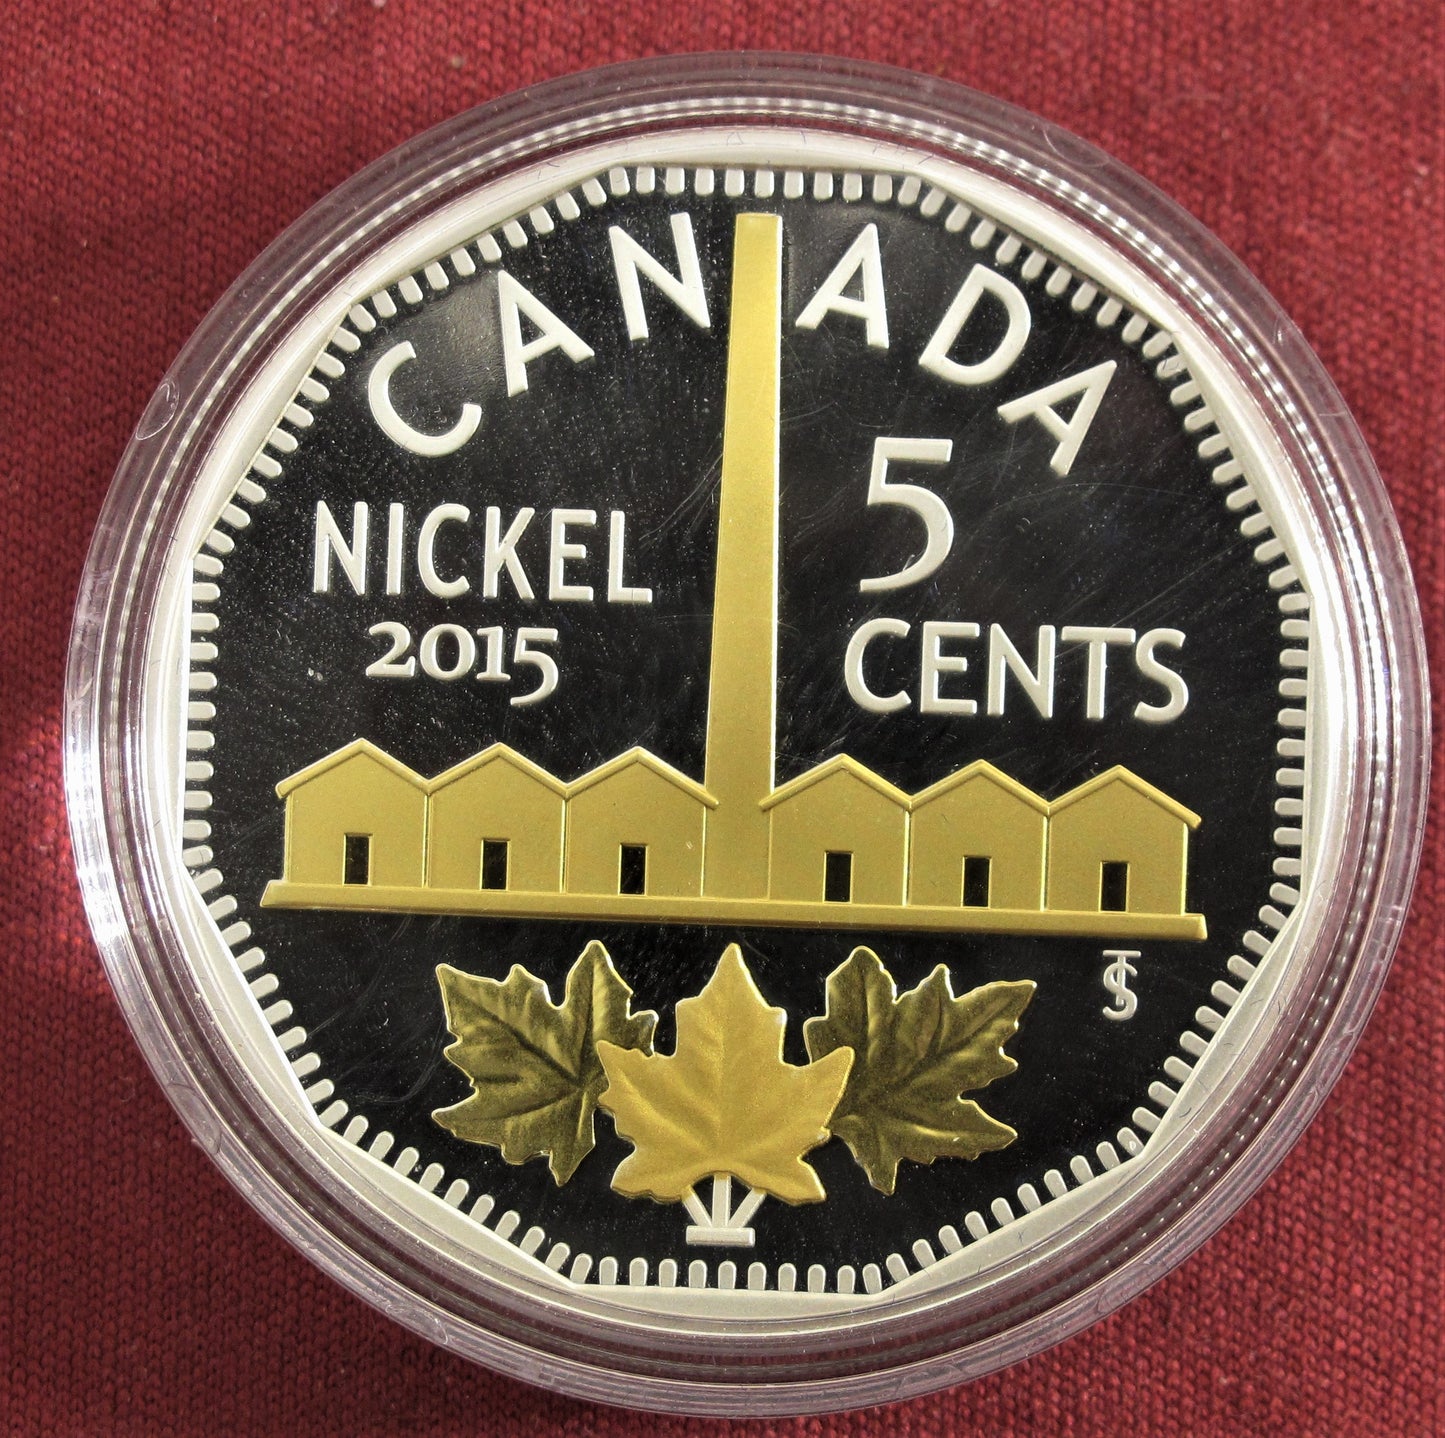 2015 5 Cents, Legacy of the Canadian Nickel, The Identification of Nickel